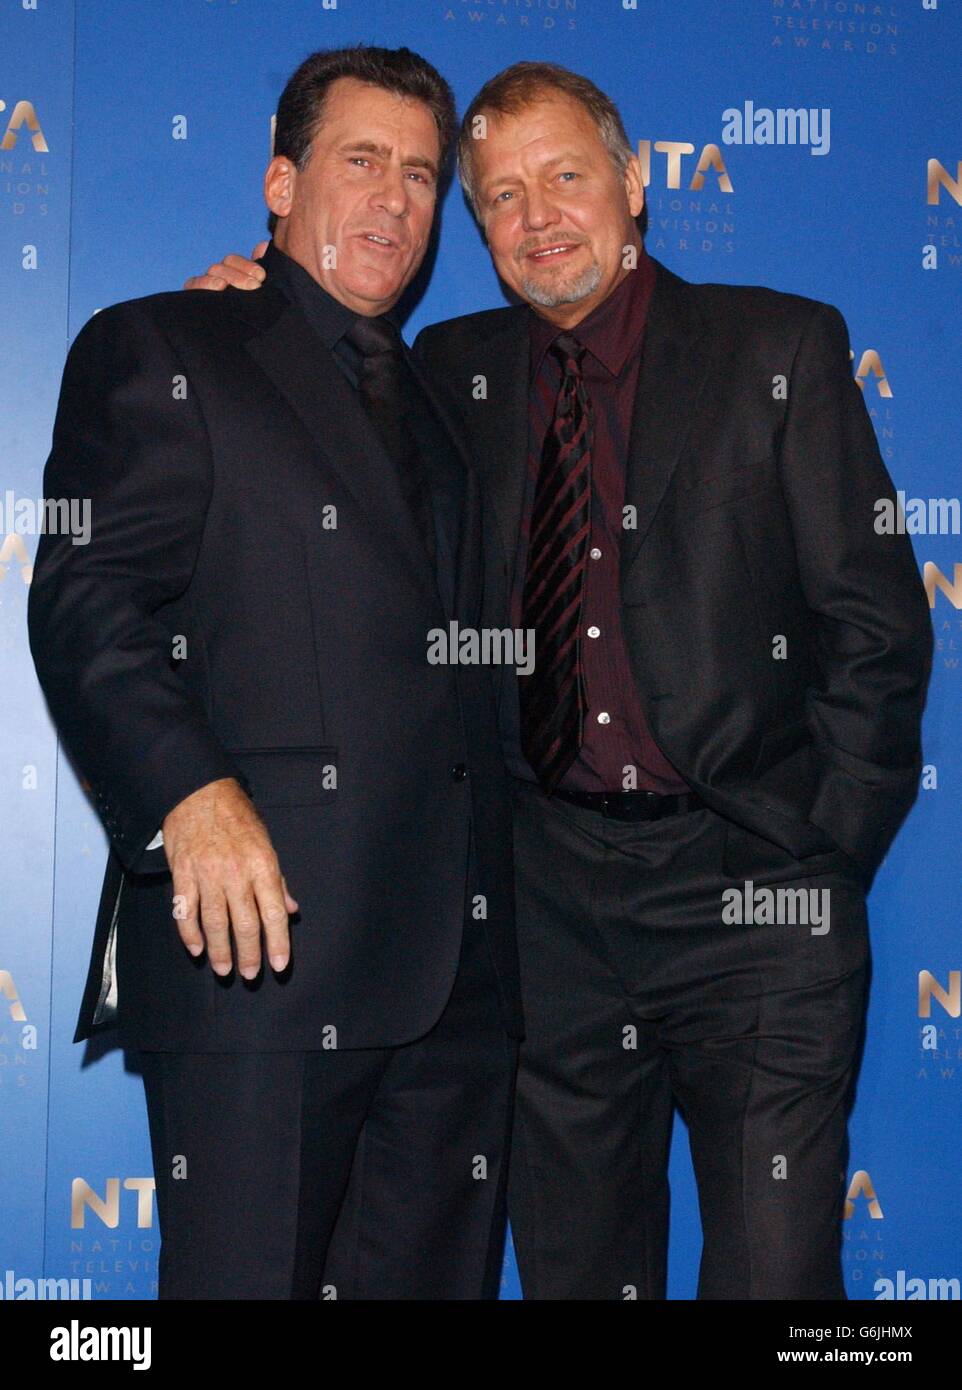 Starsky and Hutch actors Paul Michael Glaser (left) and David Soul during the annual National Television Awards at the Royal Albert Hall in central London. Stock Photo